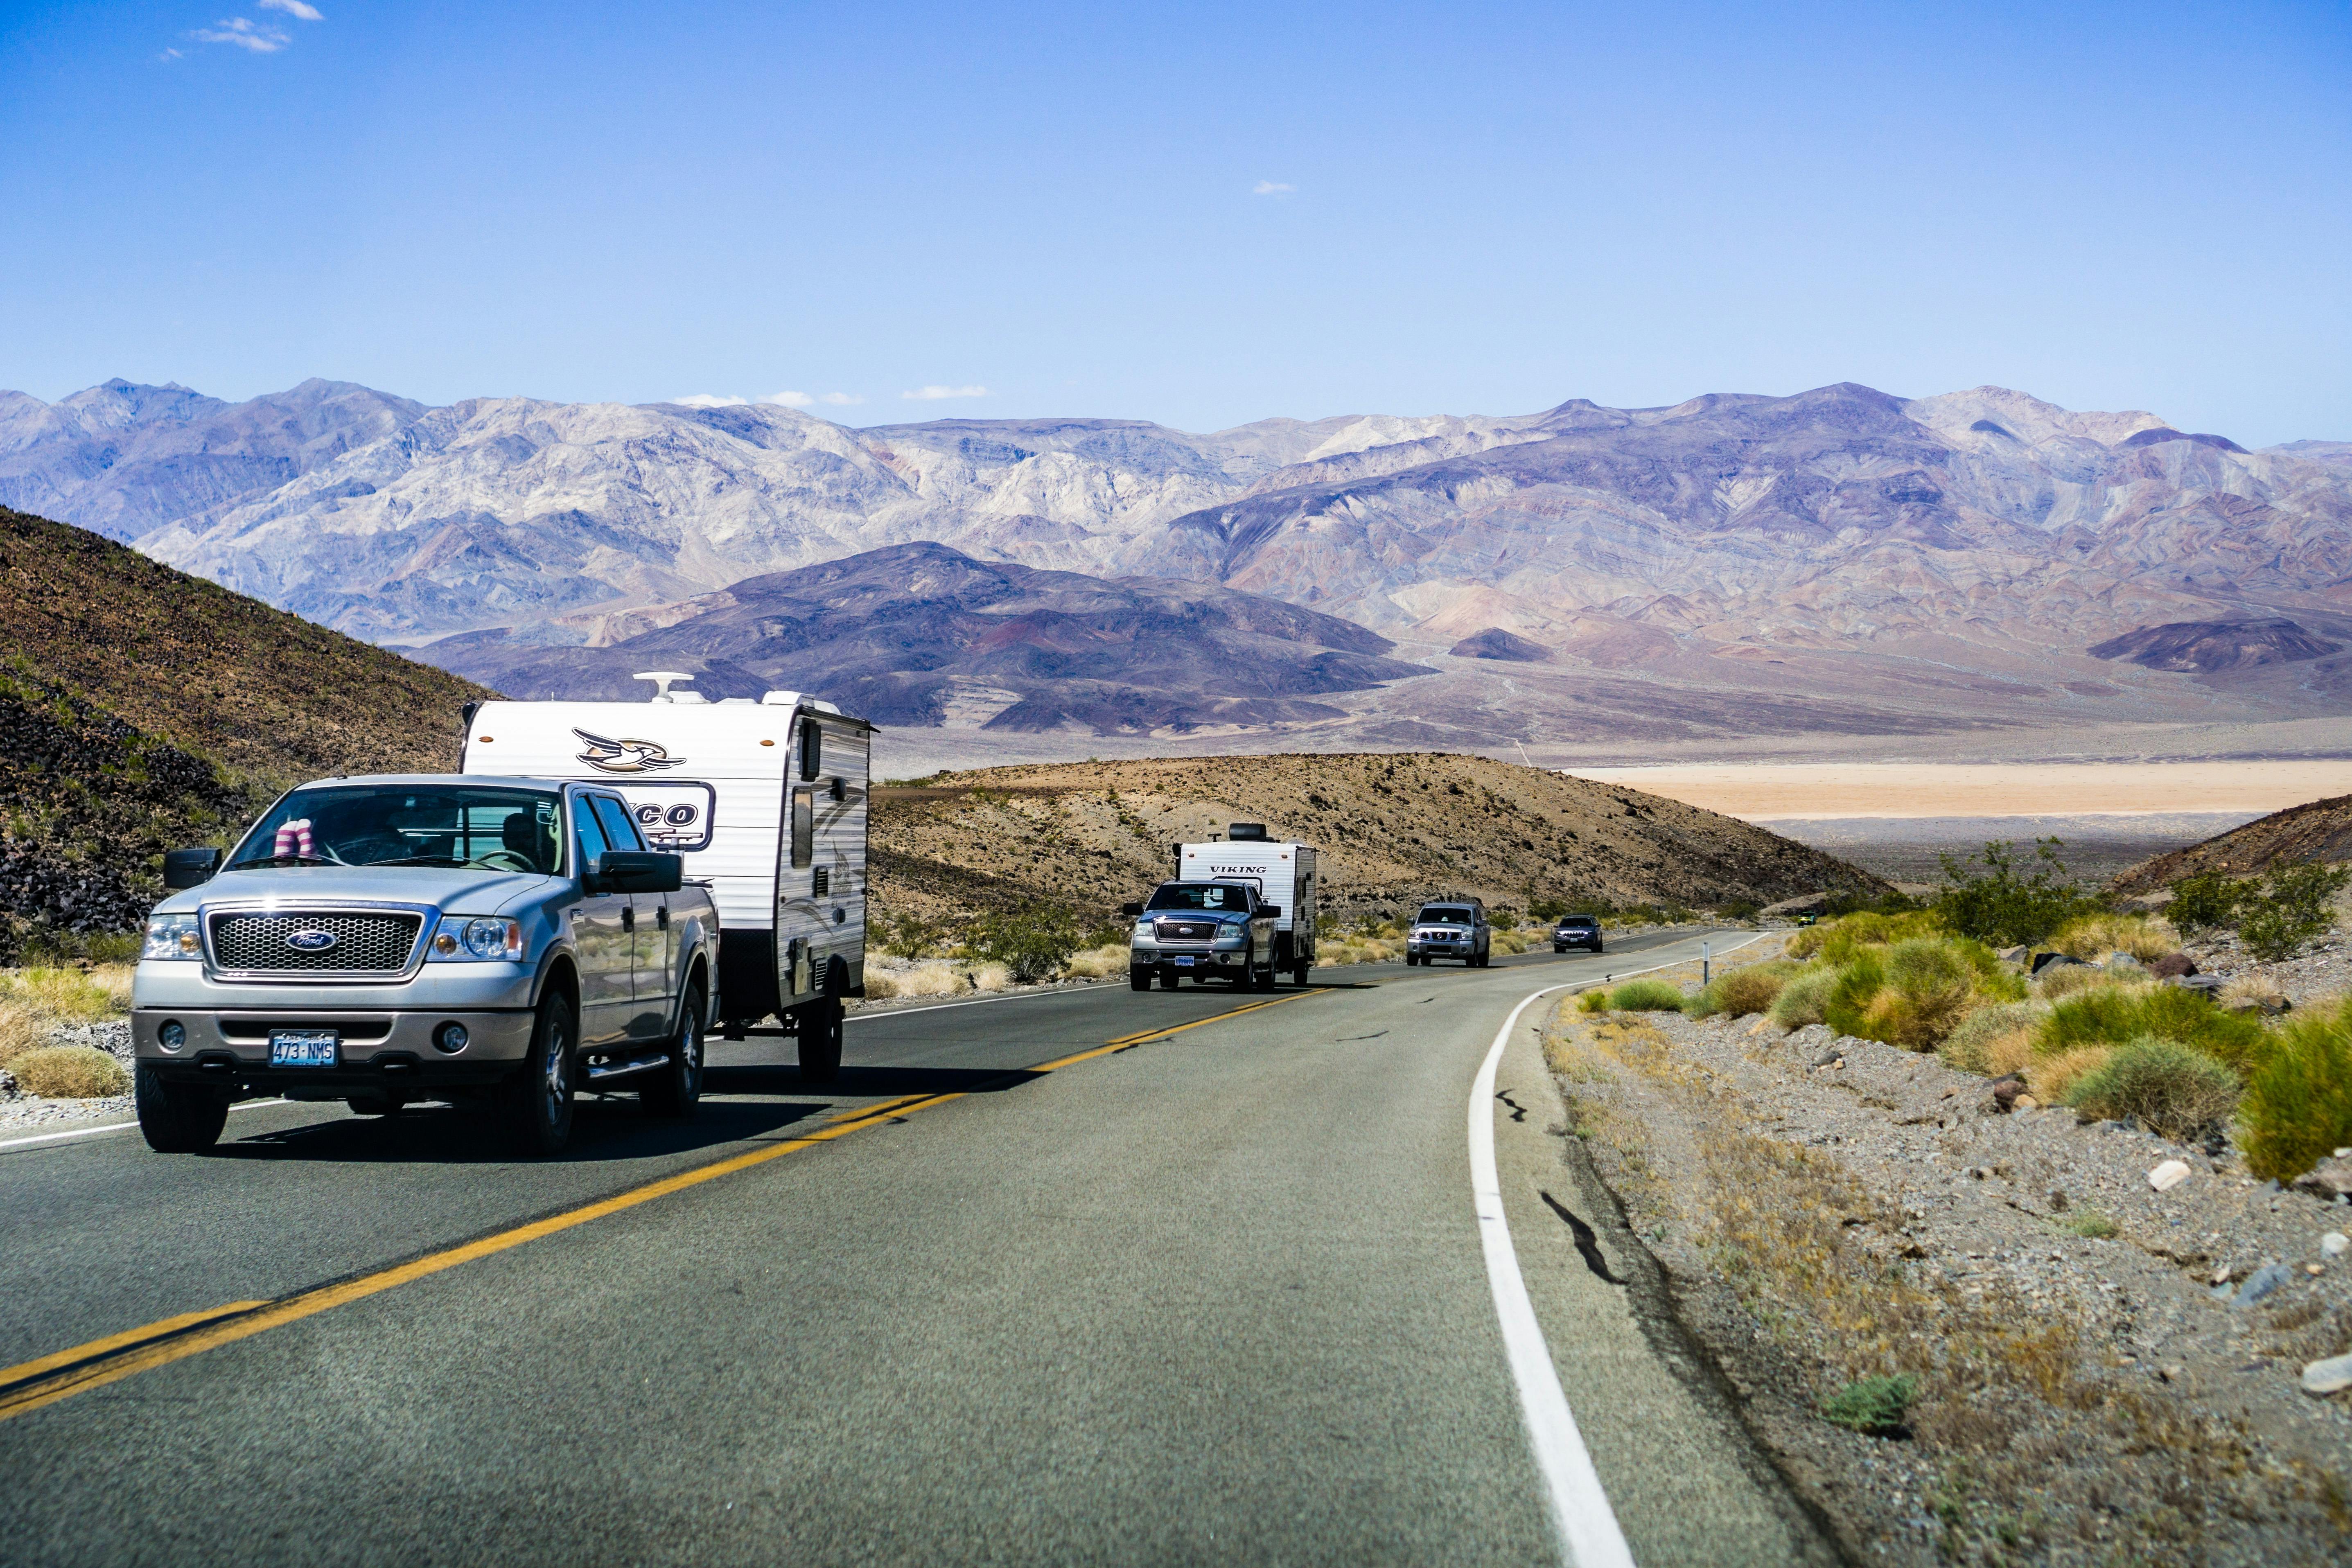 Two trucks towing RV campers driving up a hill with scenic mountains in the background